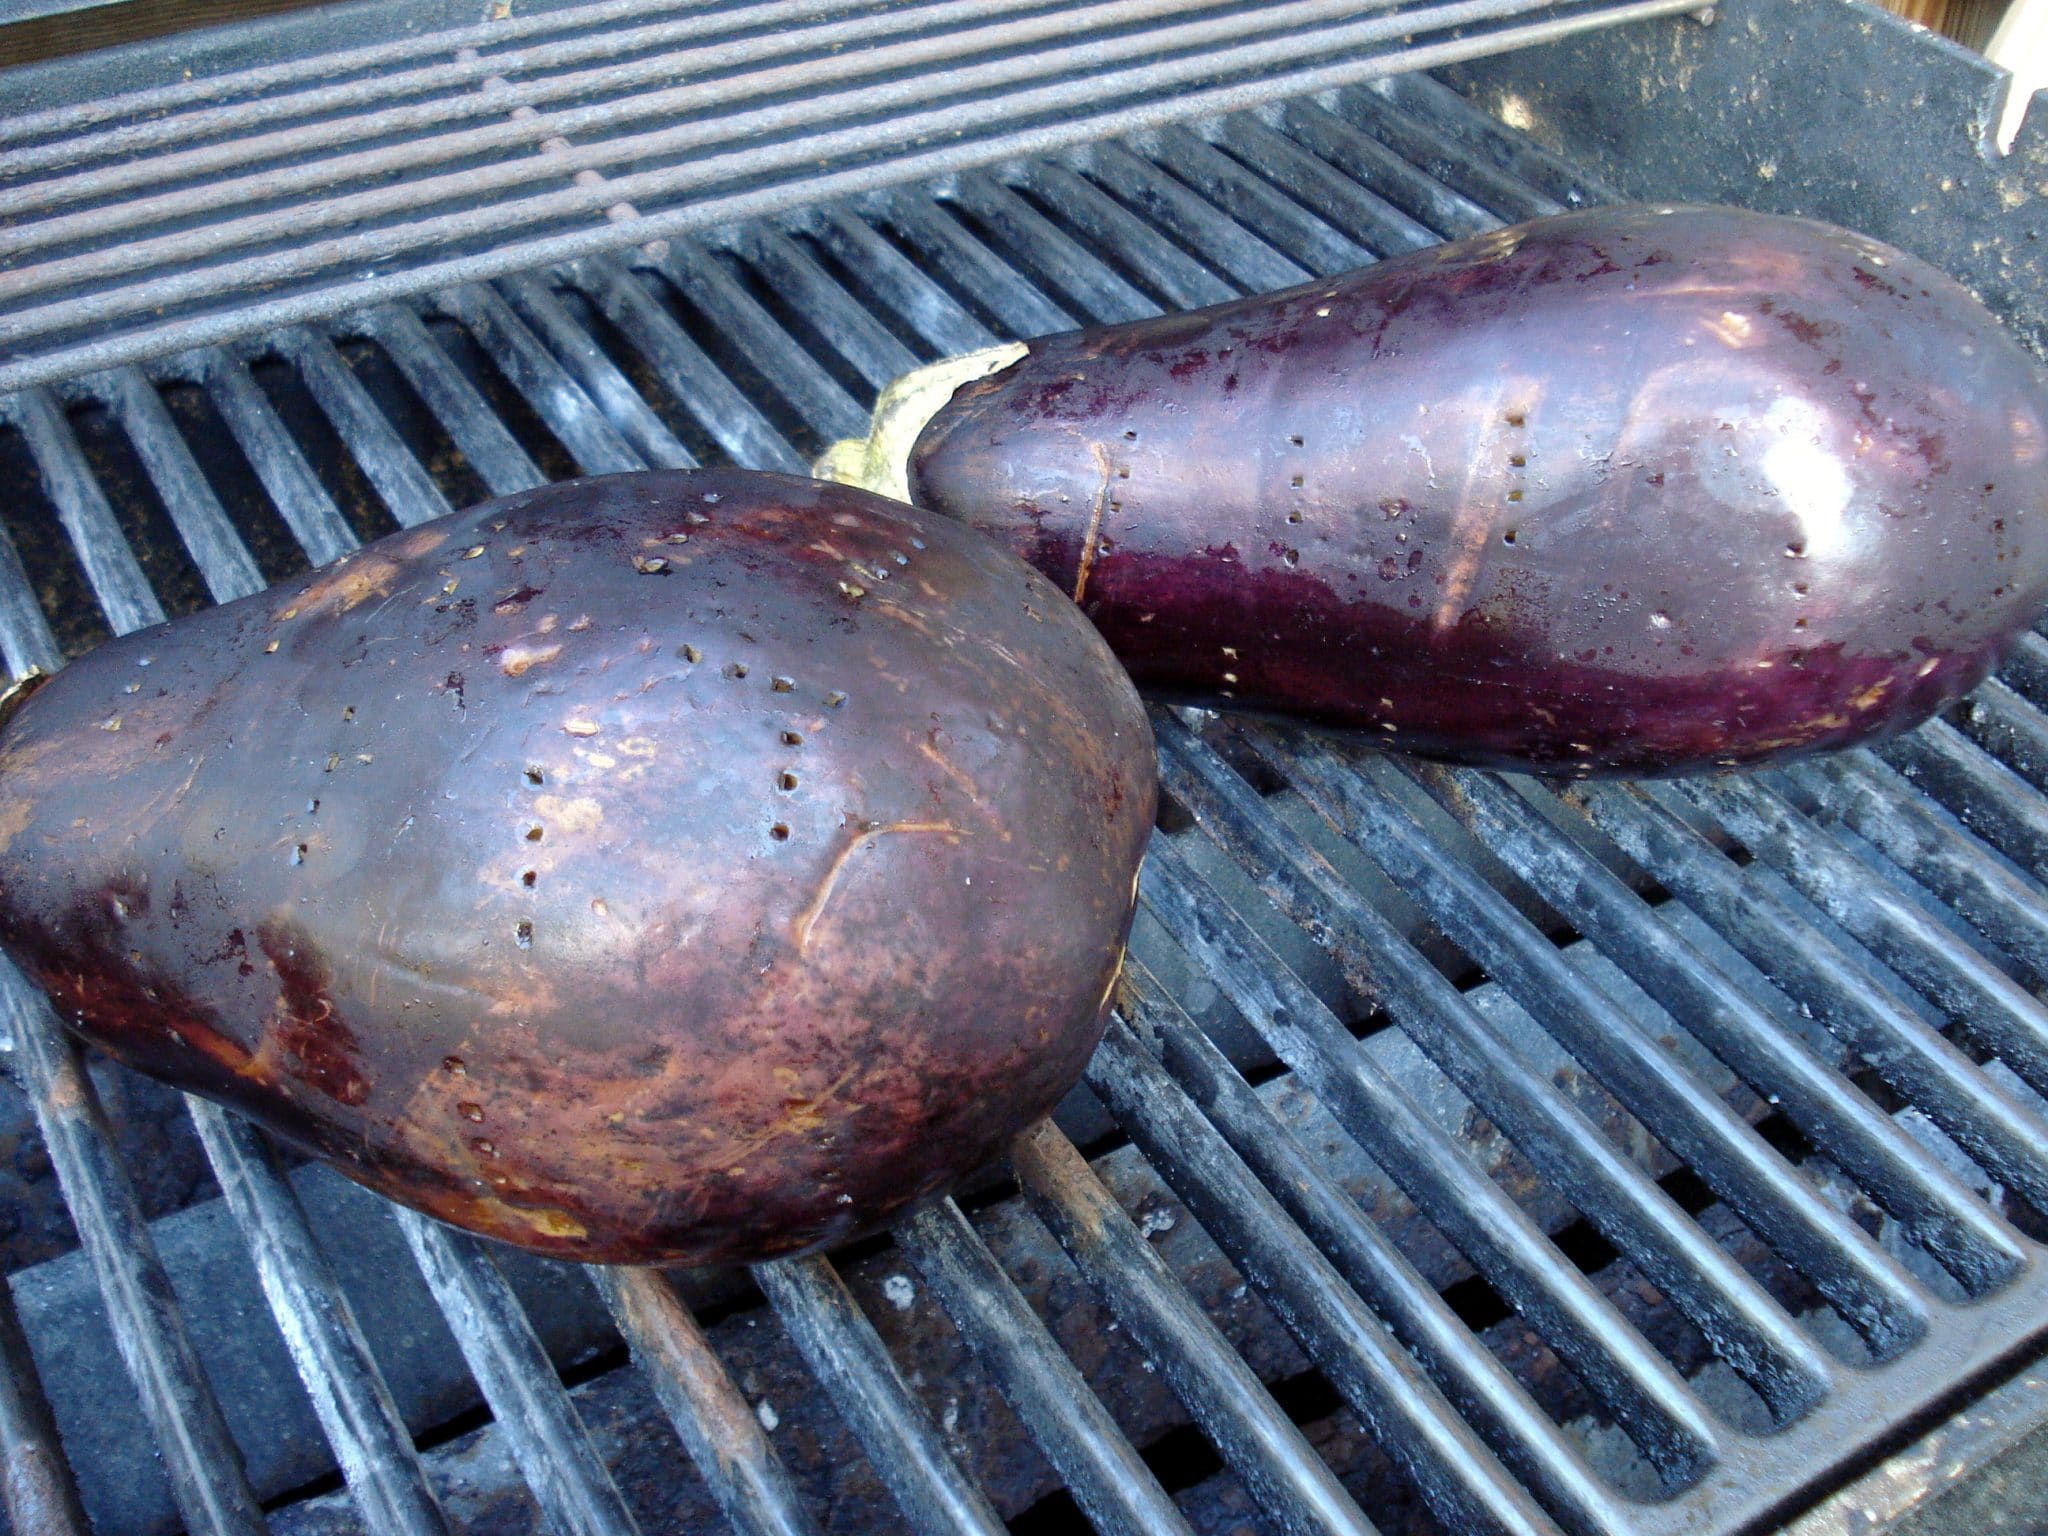 Whole eggplants roasting on the outdoor grill